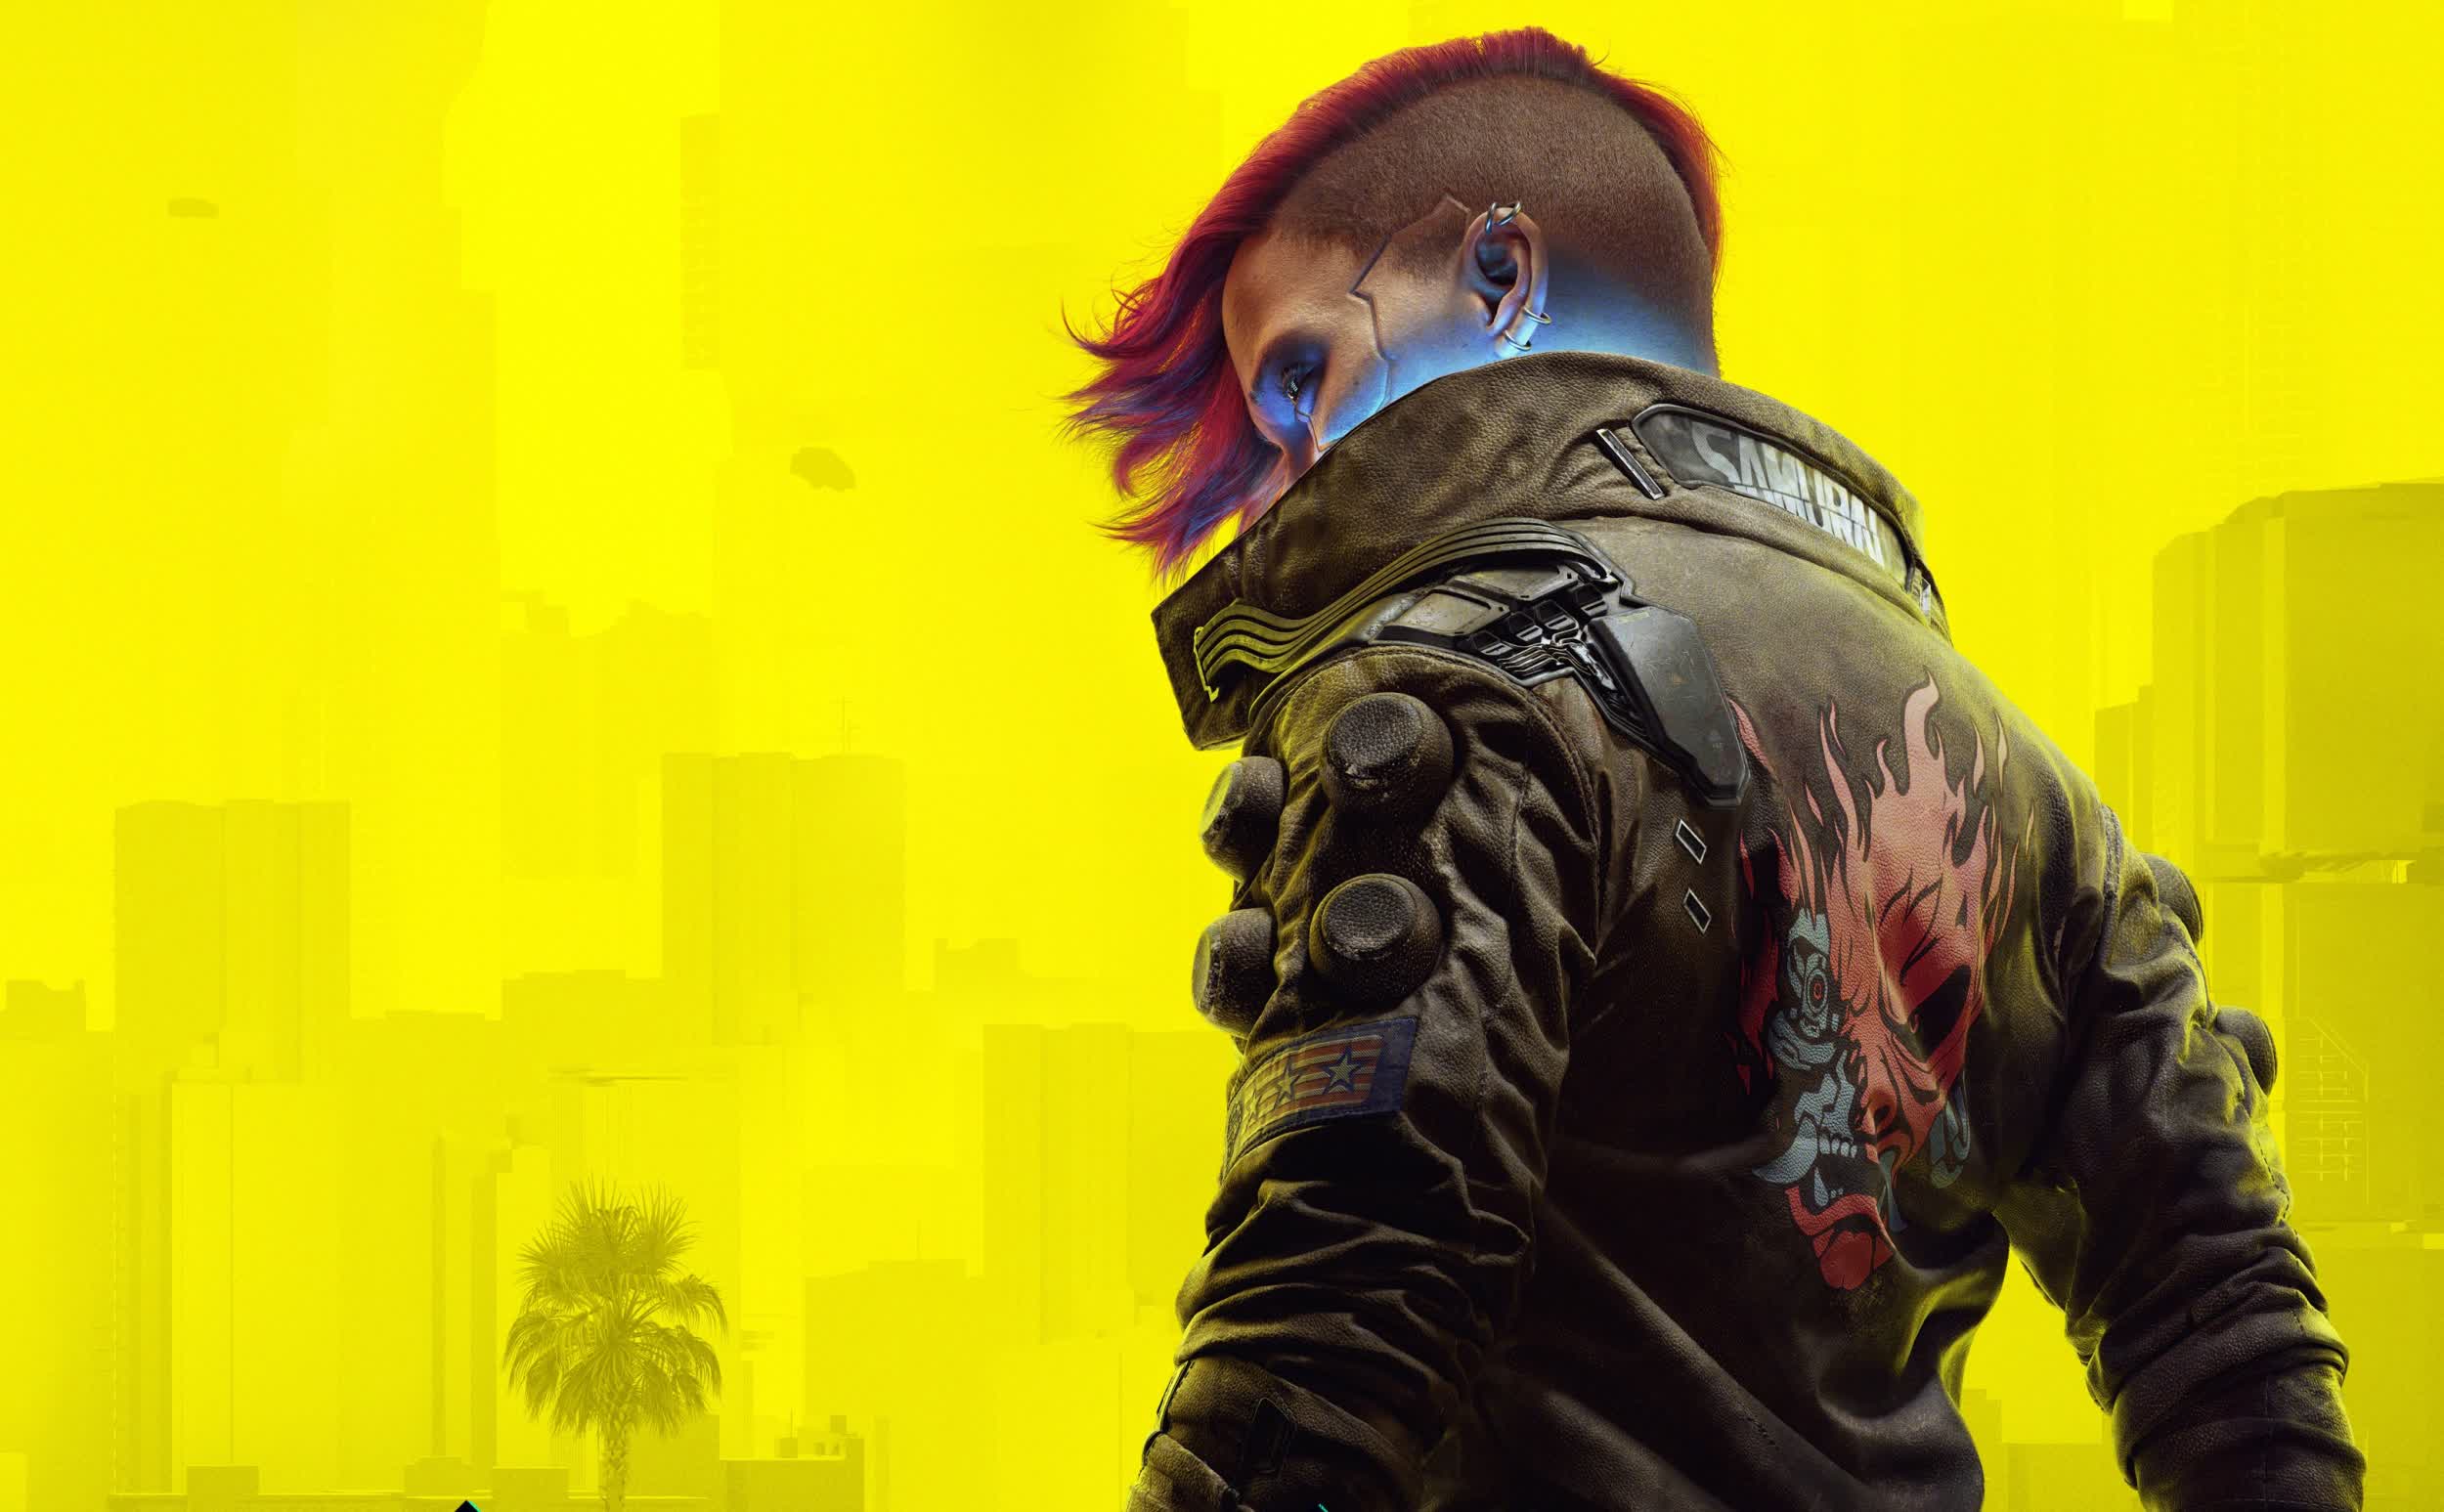 Cyberpunk 2077 drops to just $4.99 for one day only